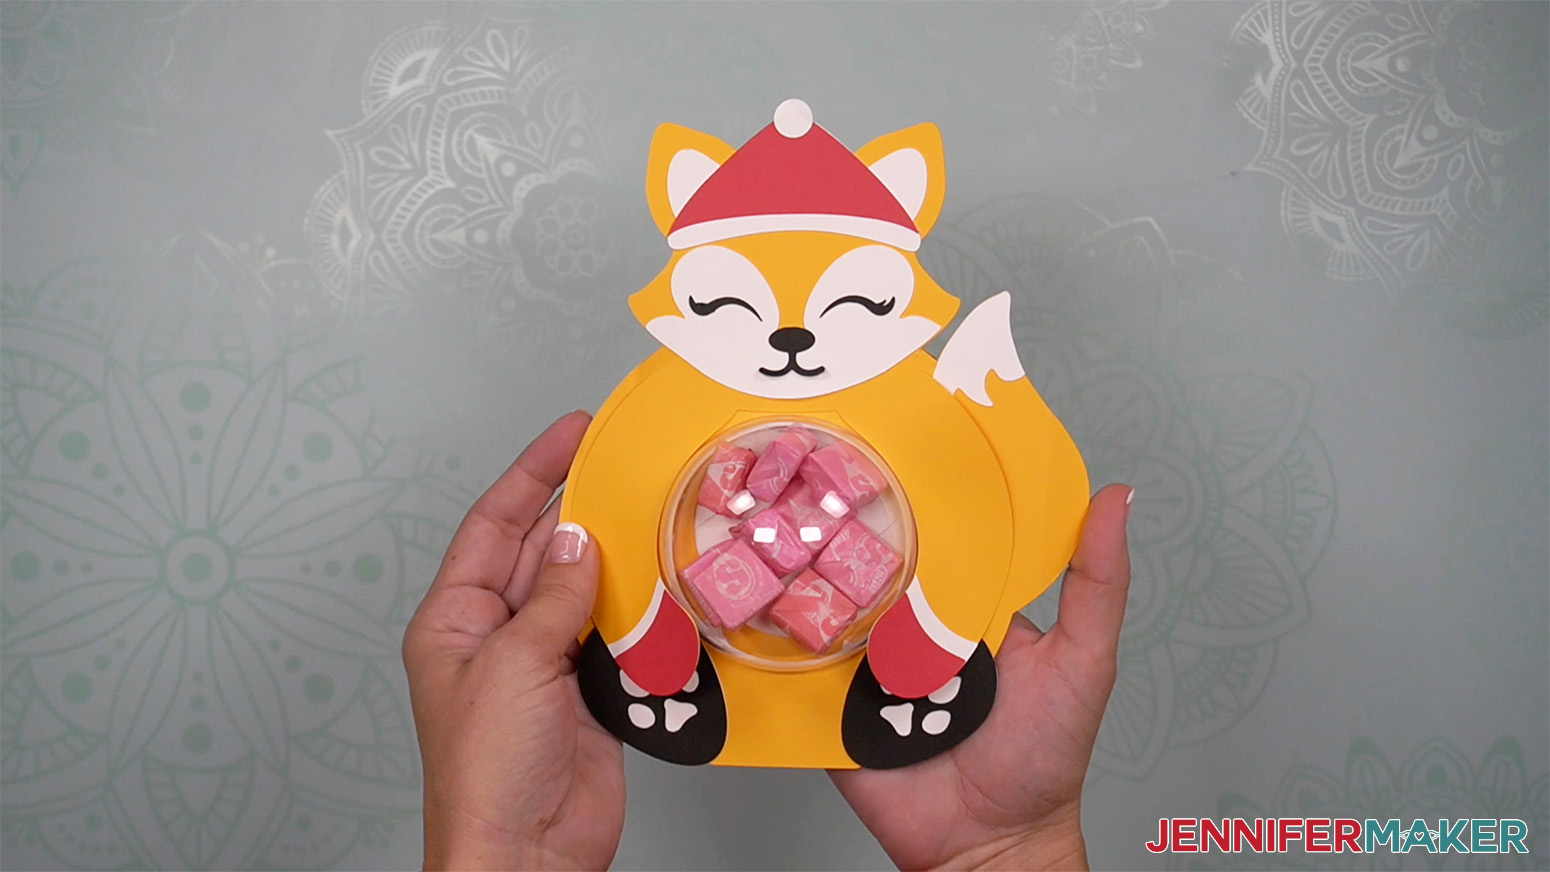 Image showing the complete fox candy holder with candy in the dome.